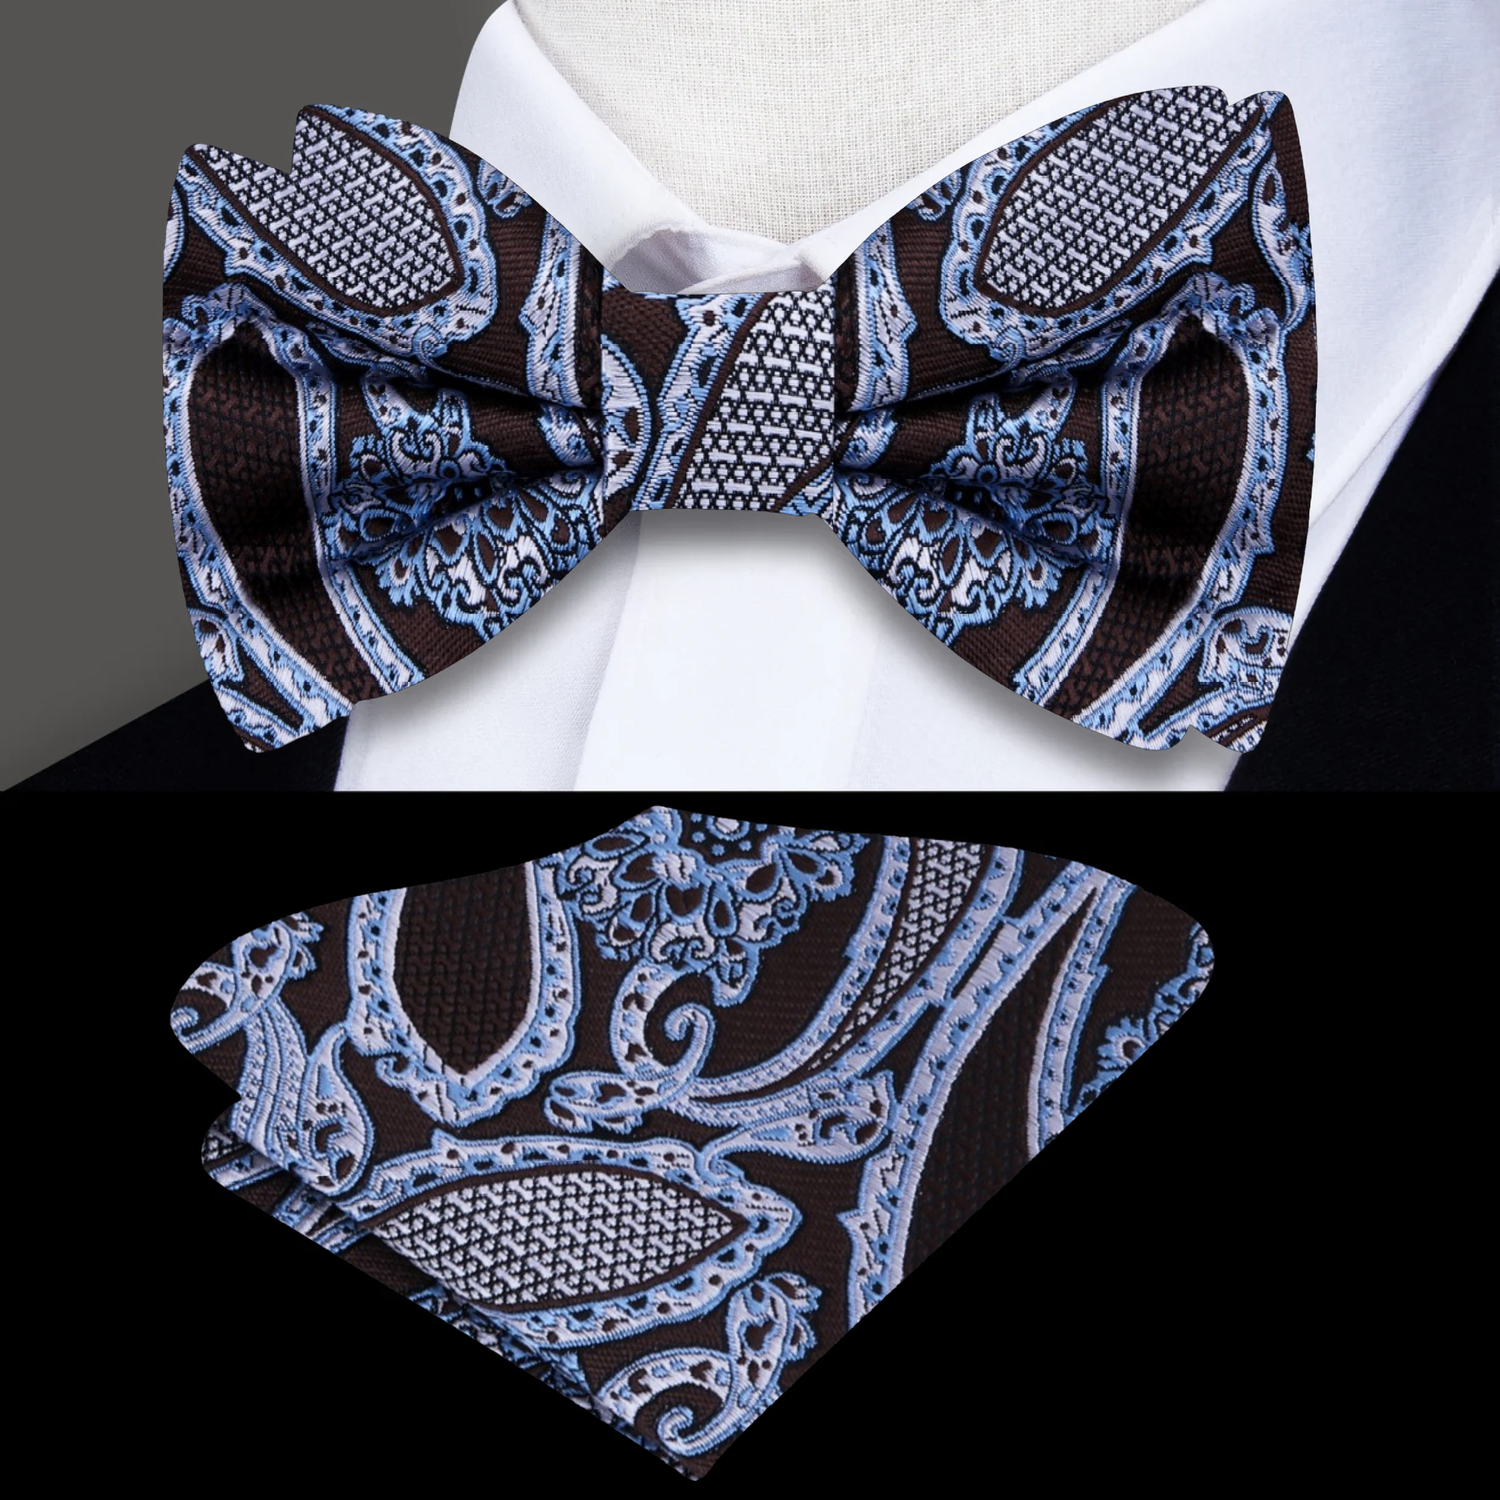 A Brown, White, Ice Blue Detailed Paisley Pattern Silk Self Tie Bow Tie, Matching Pocket Square